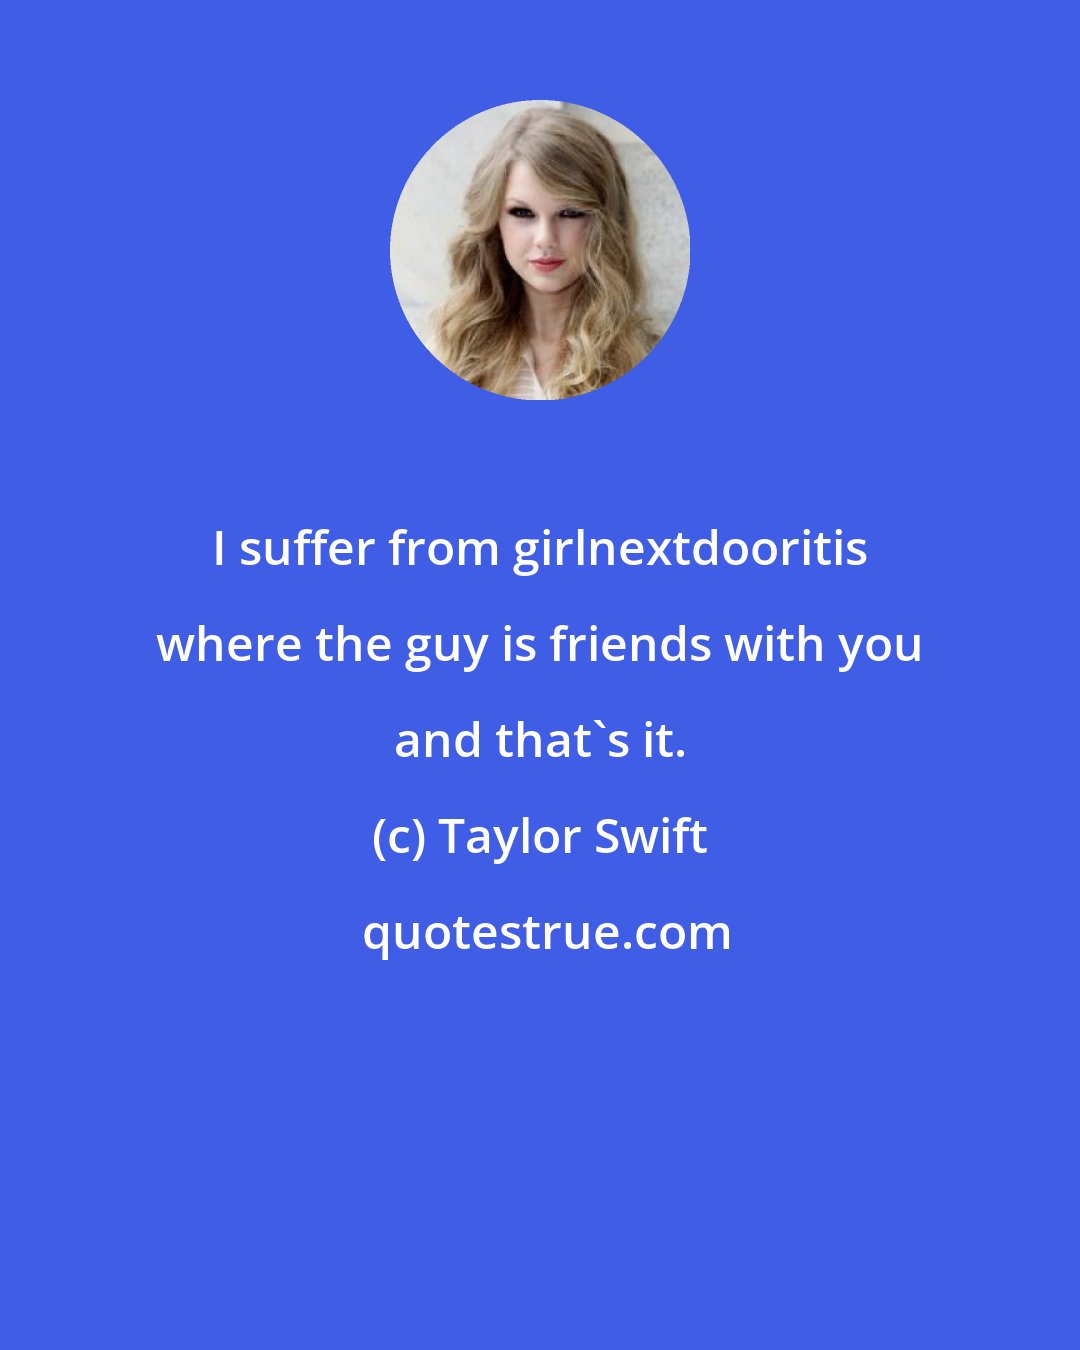 Taylor Swift: I suffer from girlnextdooritis where the guy is friends with you and that's it.